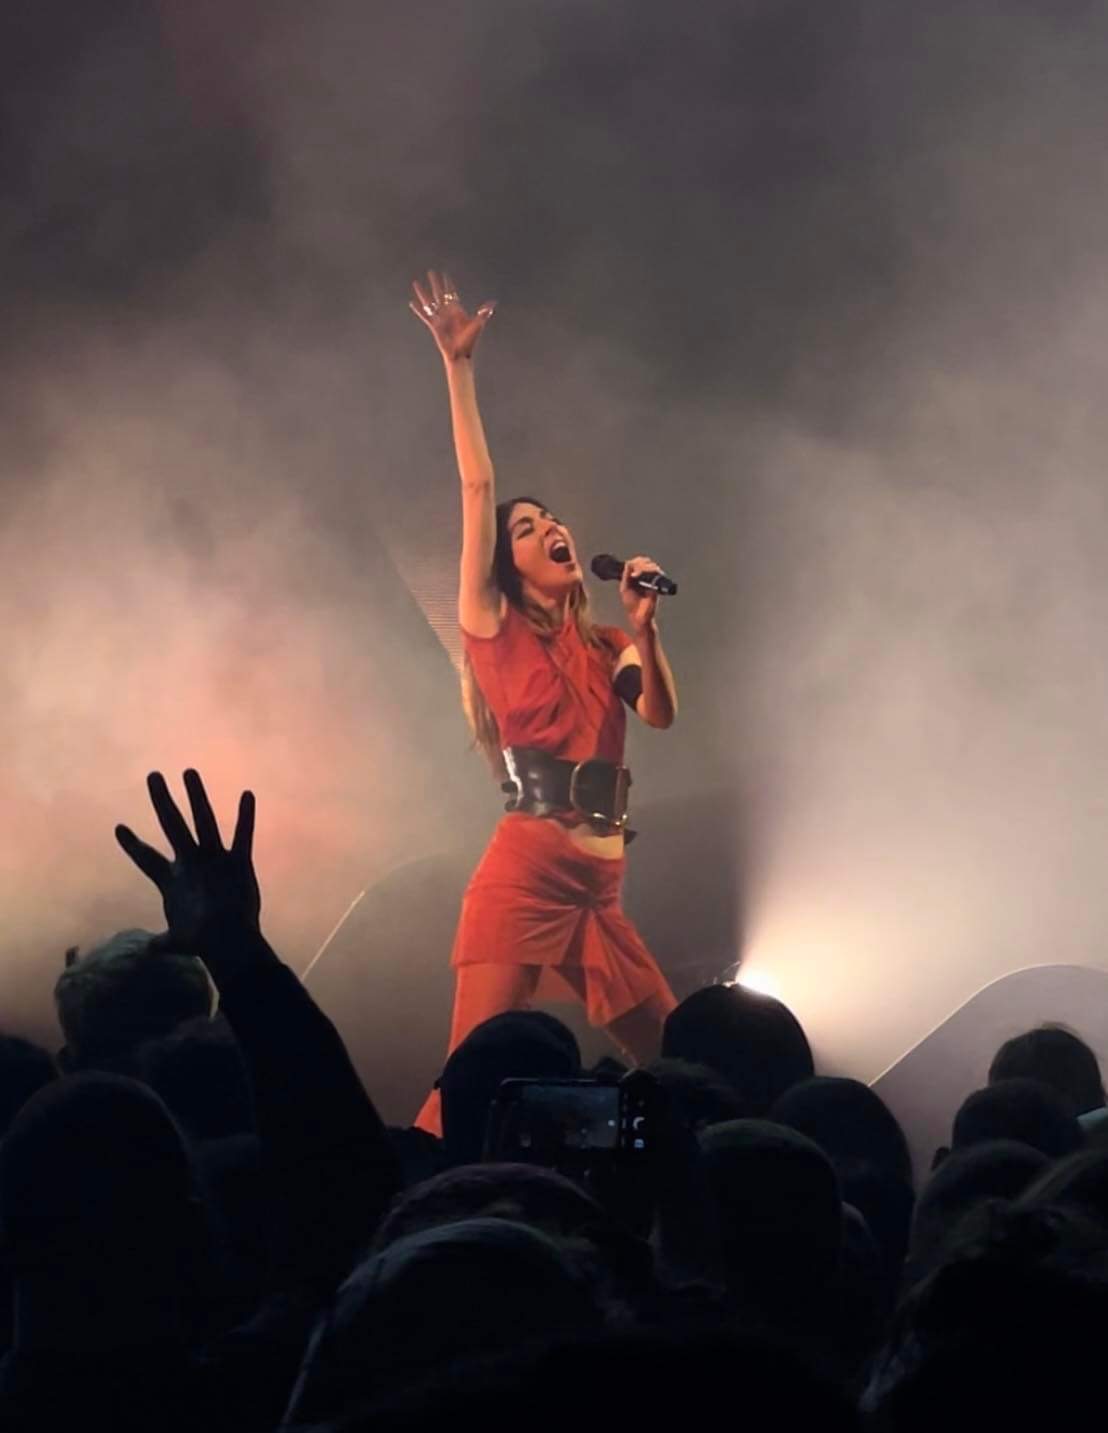 An image of Caroline with her hand in the air on stage in front of a crowd